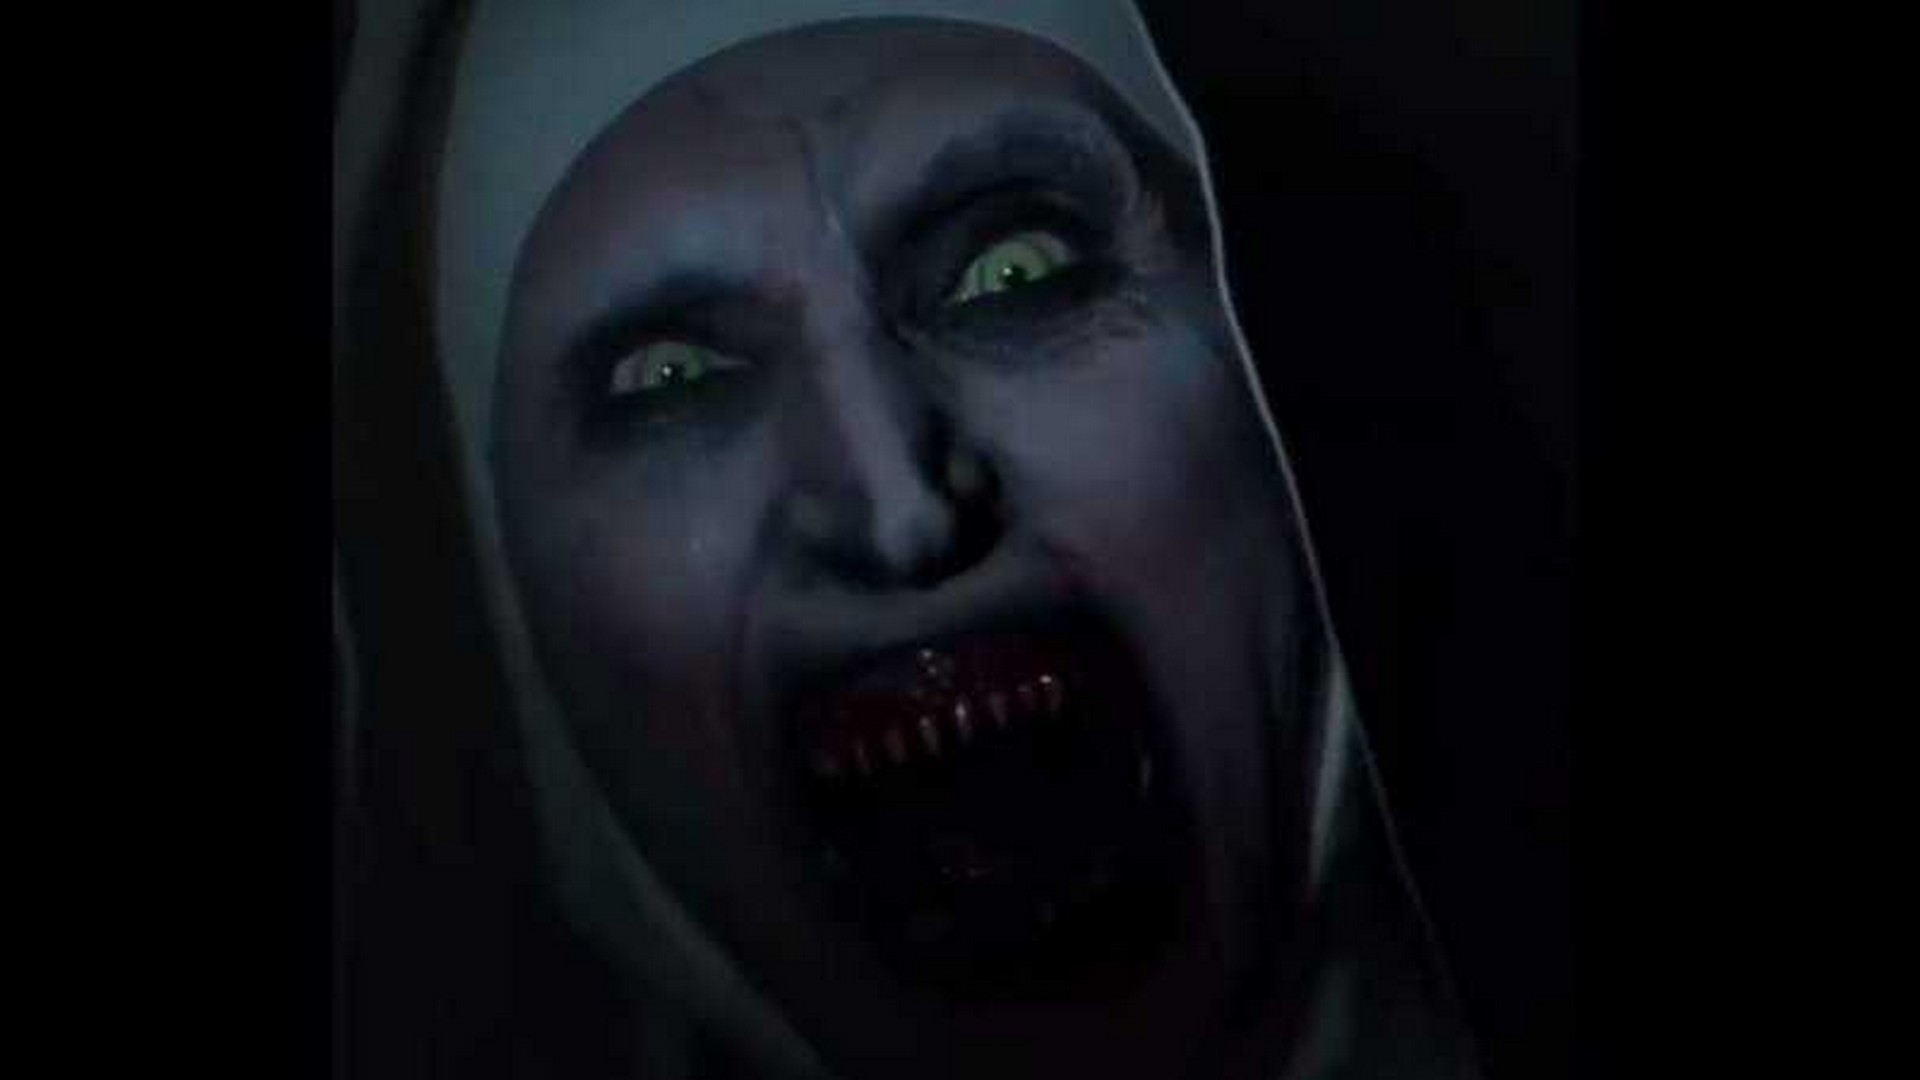 The Nun Valak Wallpaper HD with image resolution 1920x1080 pixel. You can make this wallpaper for your Desktop Computer Backgrounds, Mac Wallpapers, Android Lock screen or iPhone Screensavers